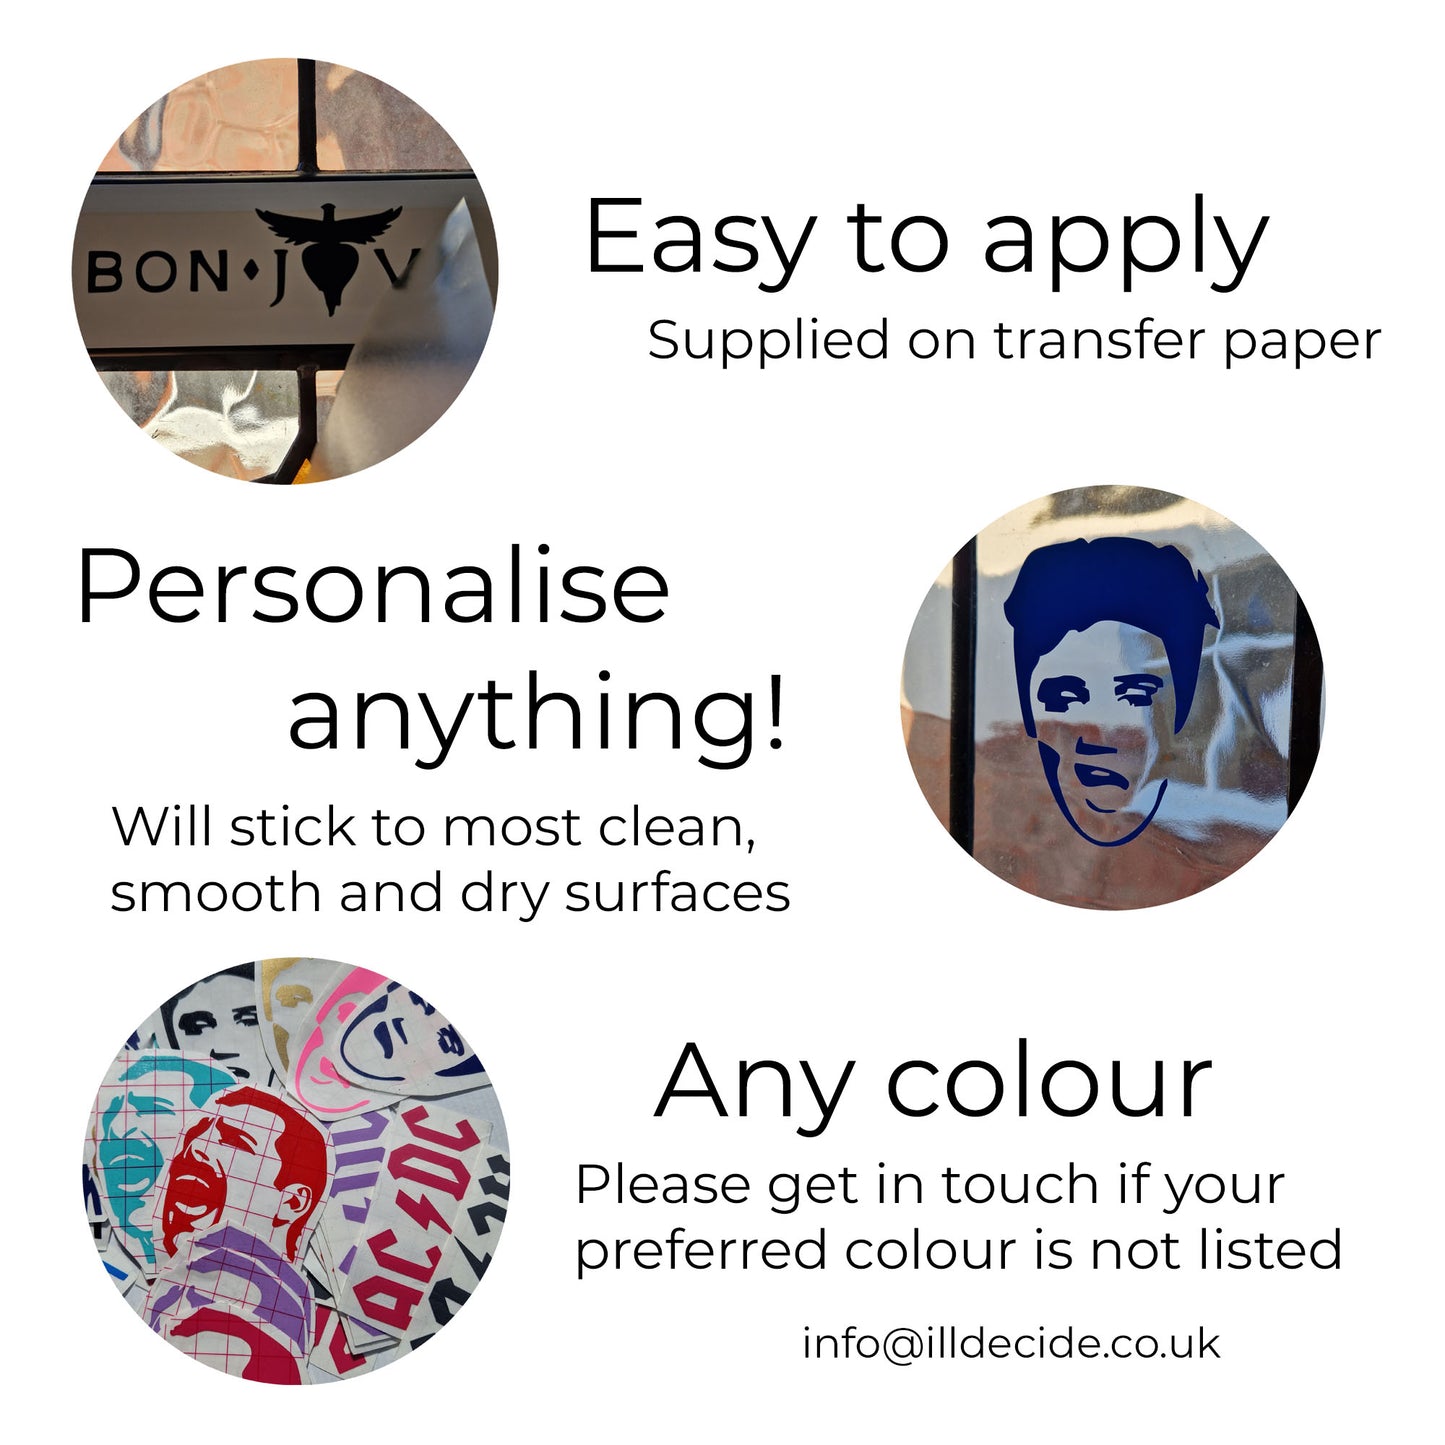 easy to apply, supplied on transfer paper, personalise anything, sticks to most clean dry surfaces. 100% guarantee